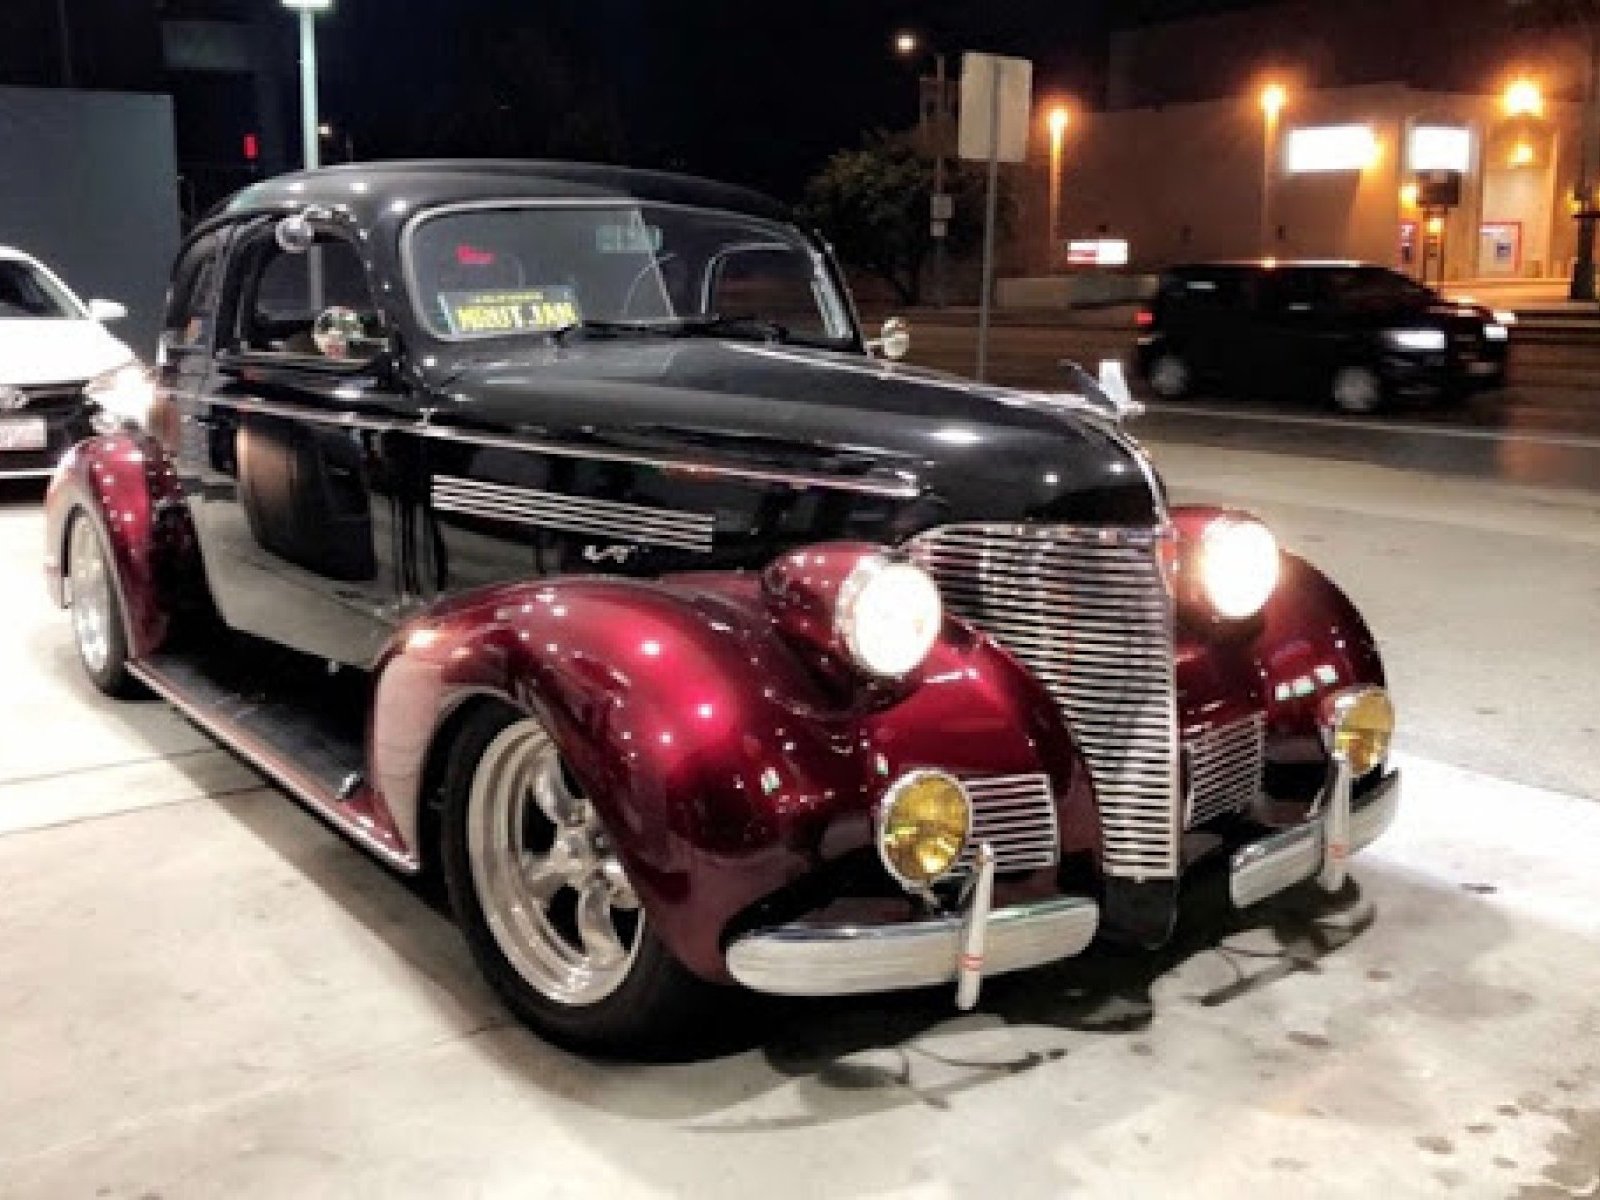 1939 Chevrolet Business coupe